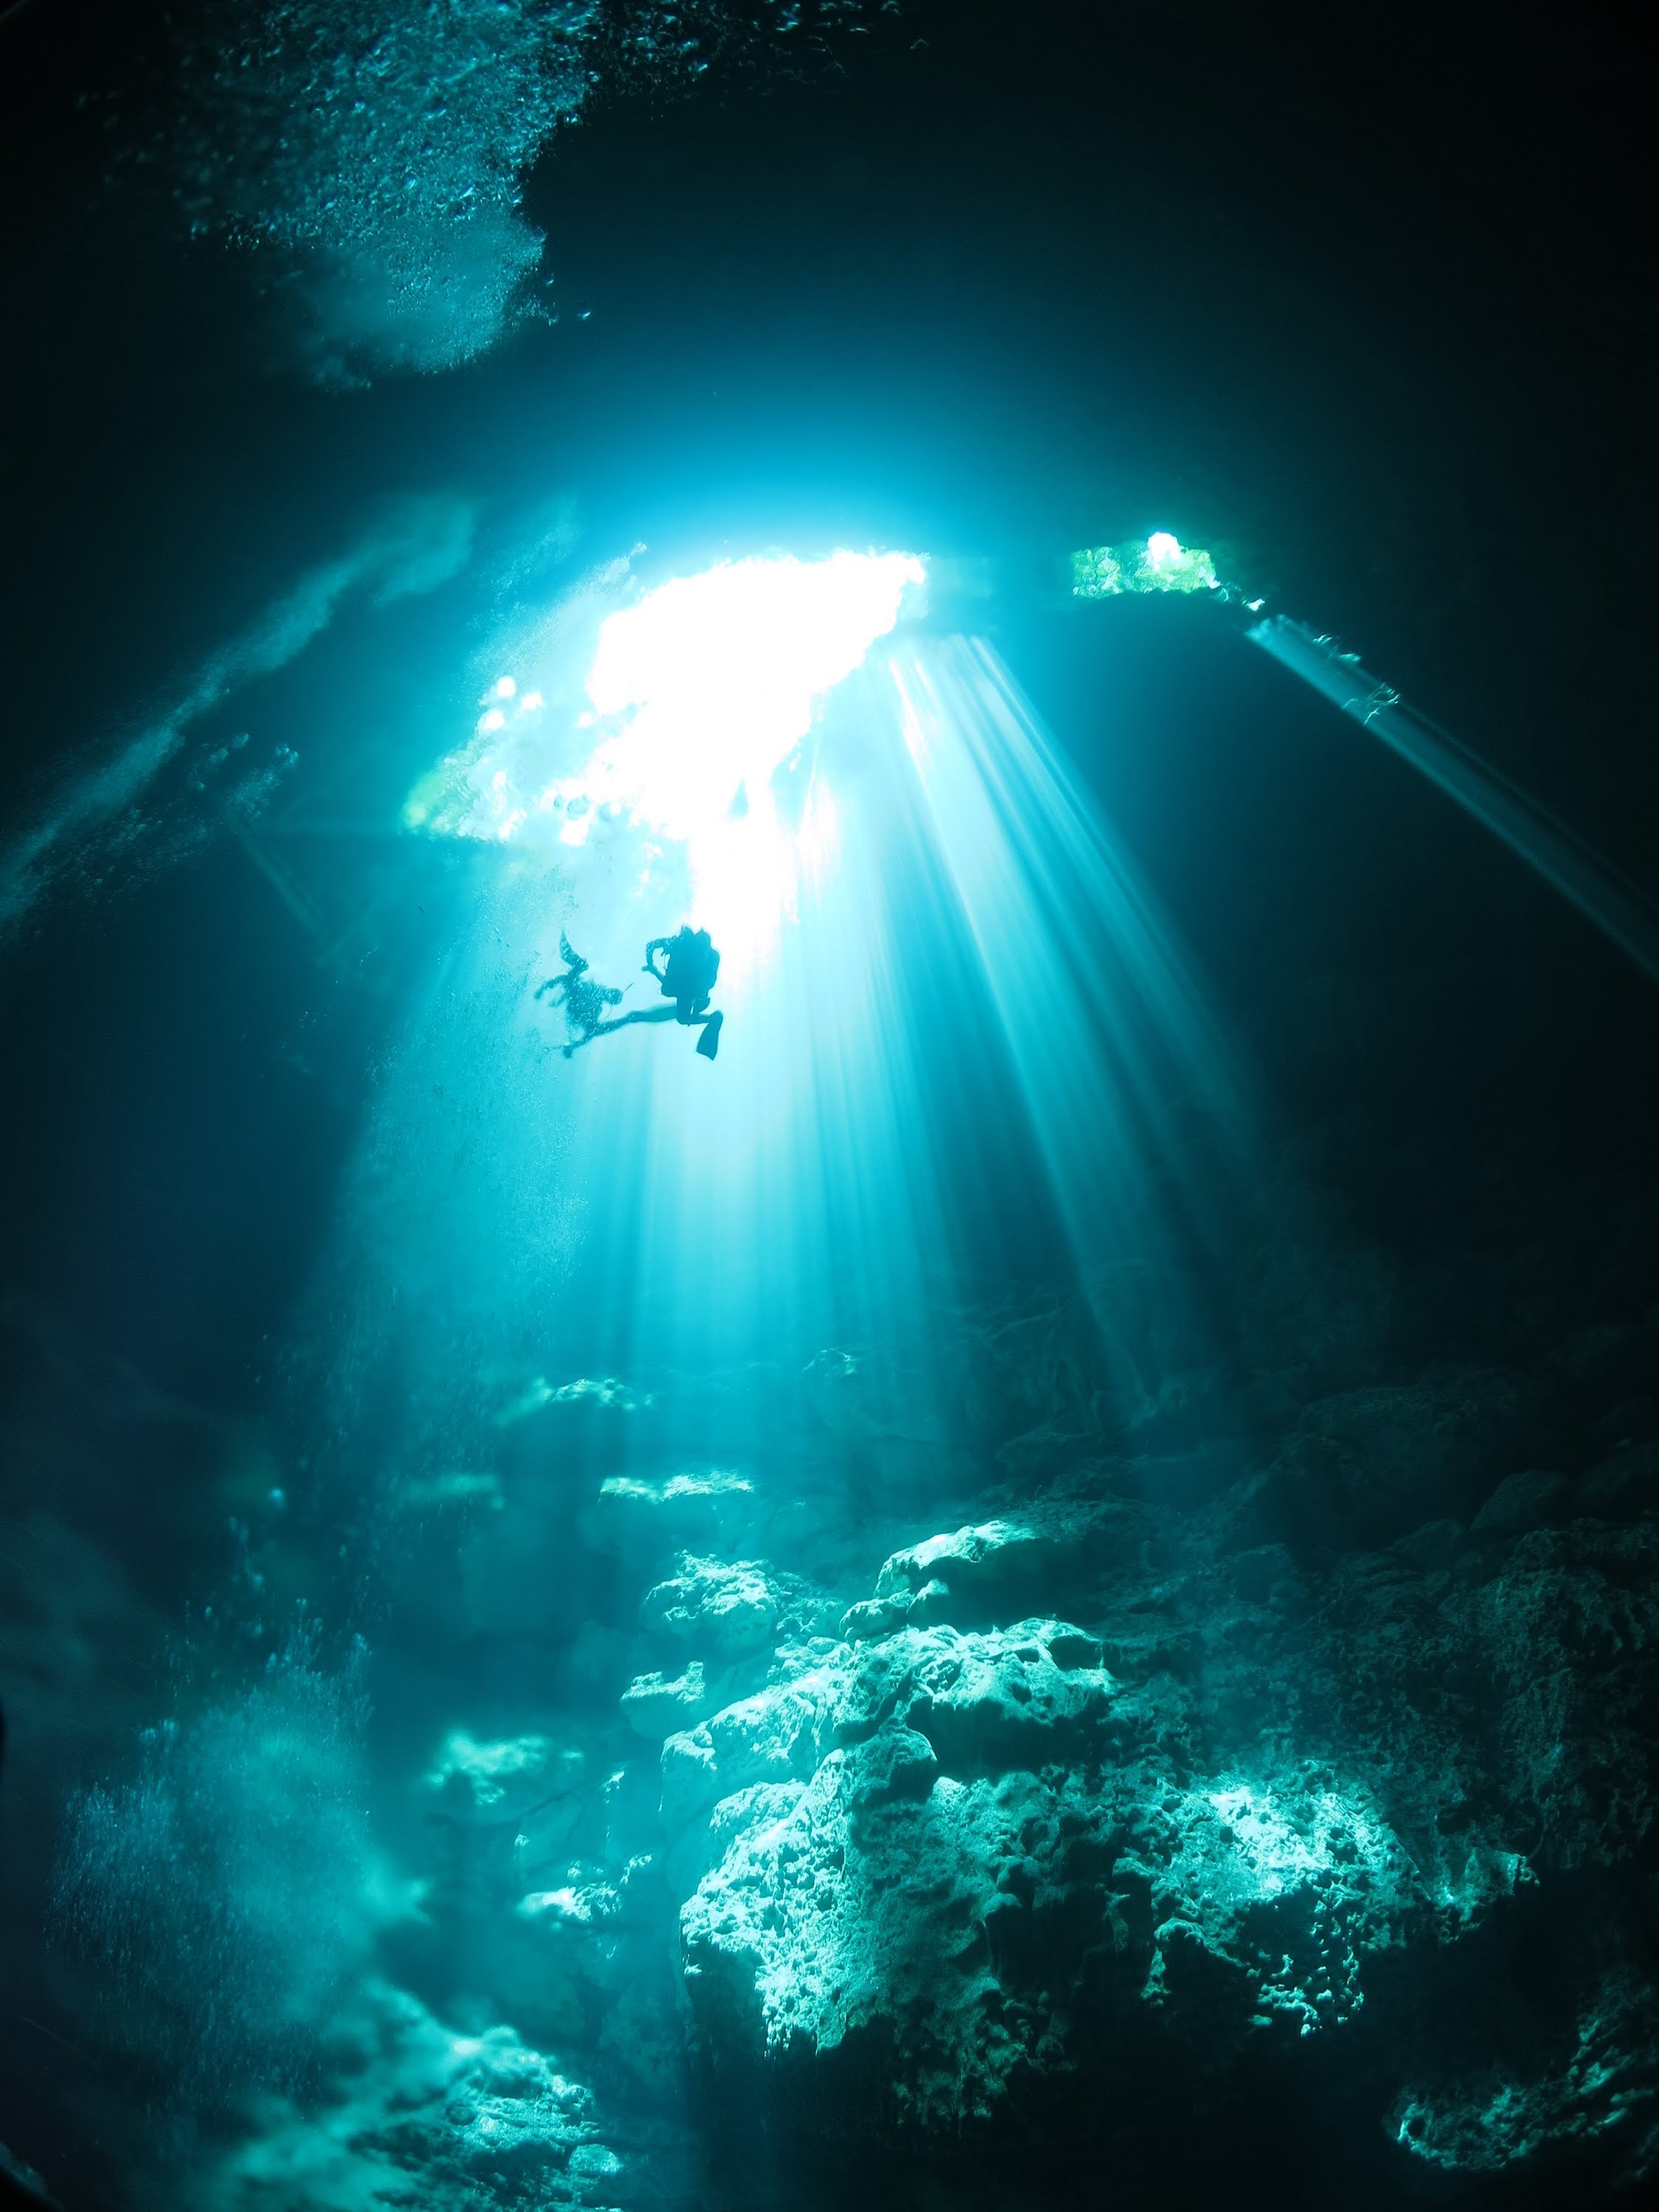 Underwater Caves Wallpapers High Quality | Download Free